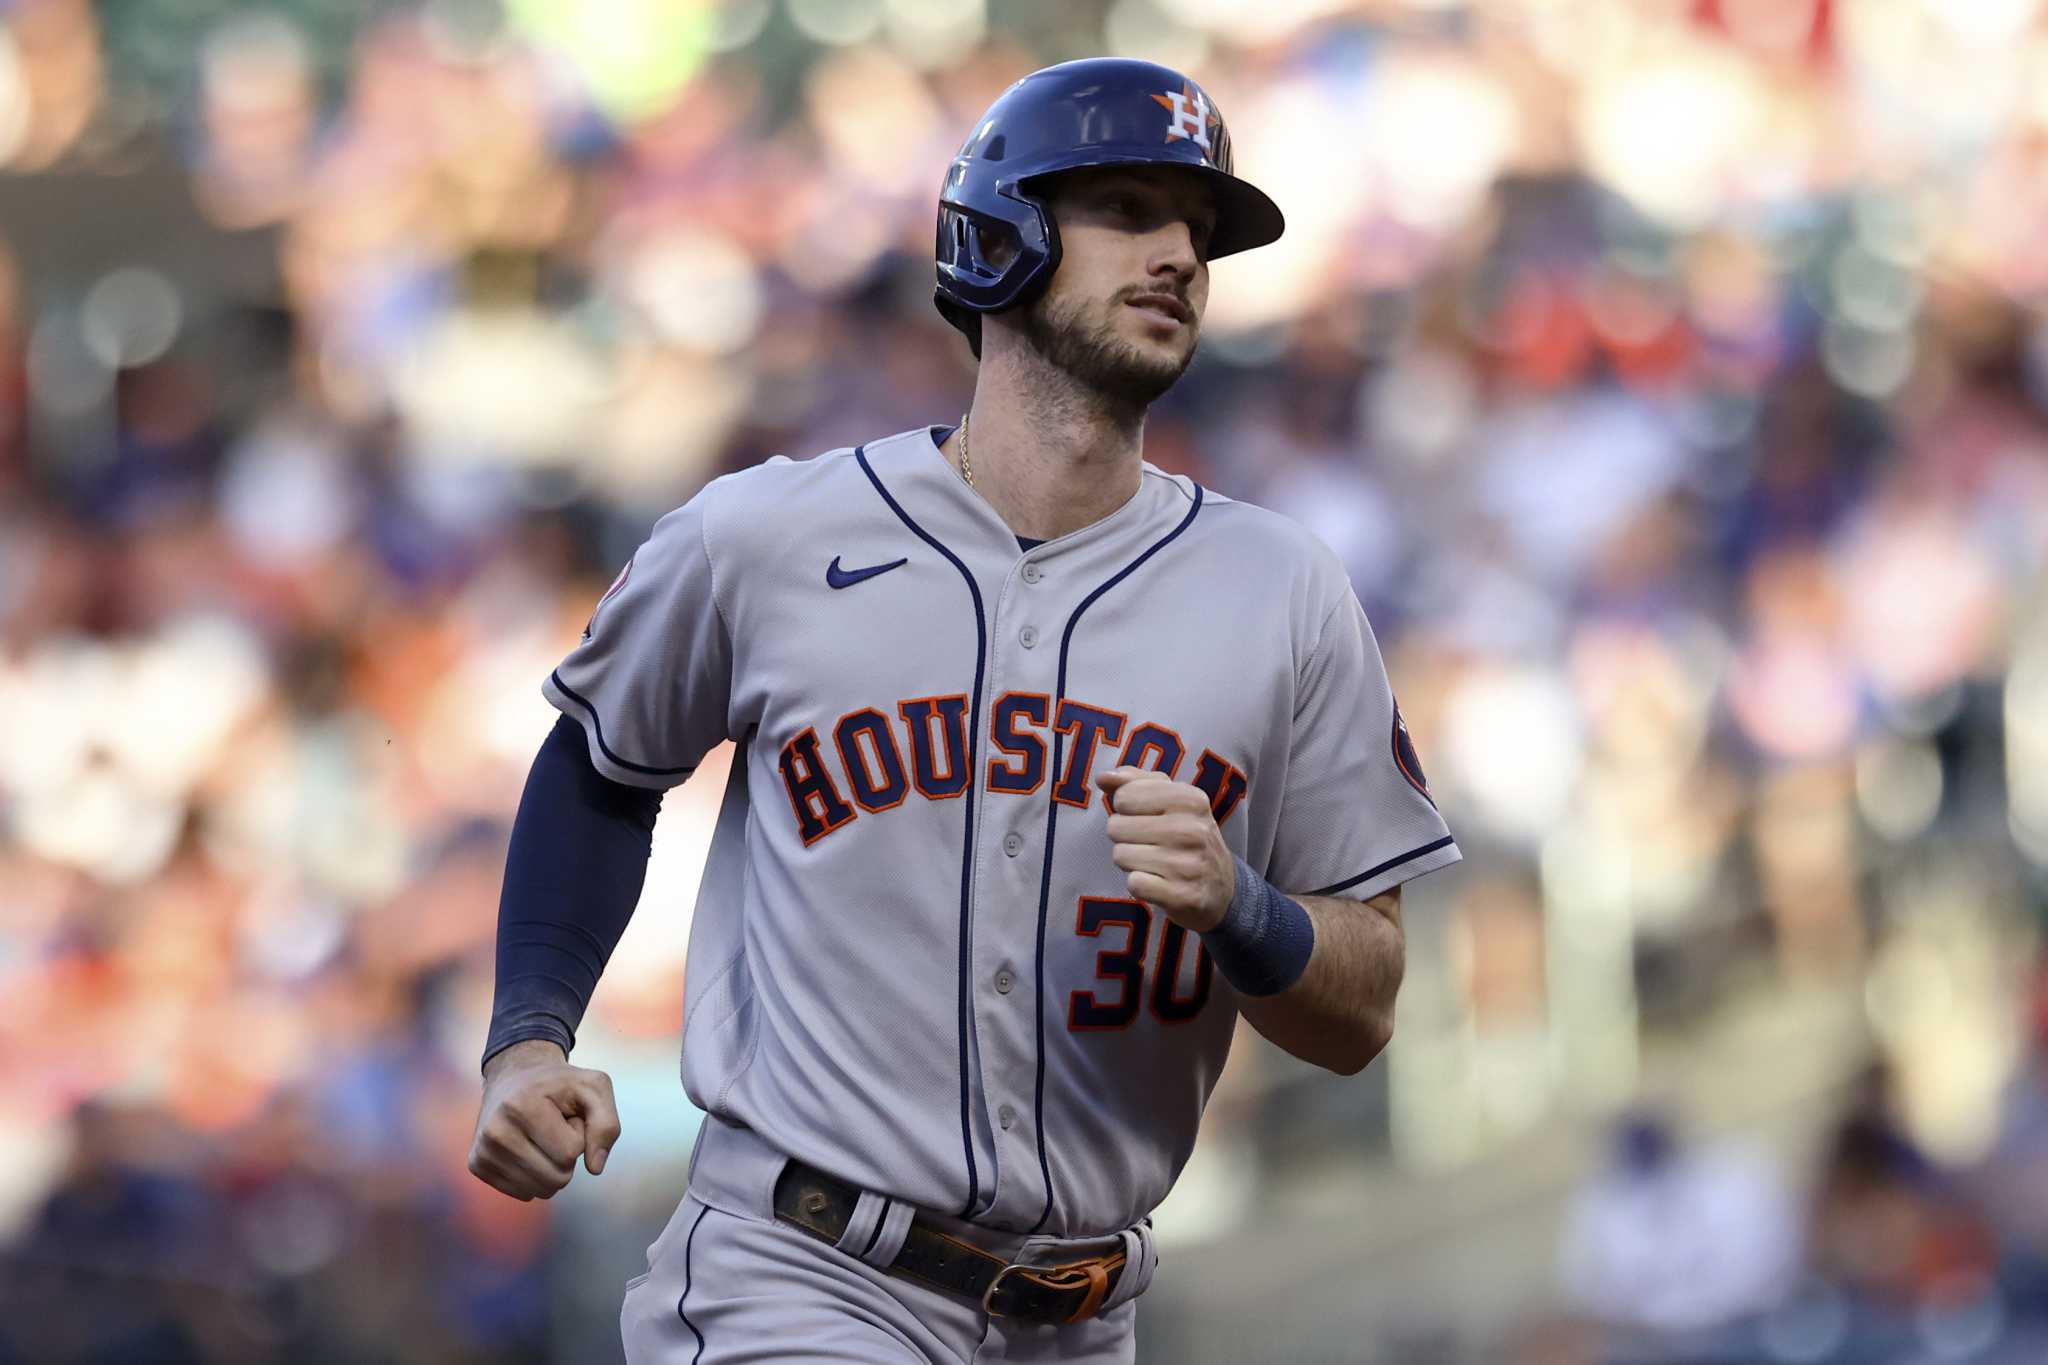 Astros' Kyle Tucker on track to join elite 30-30 club with power